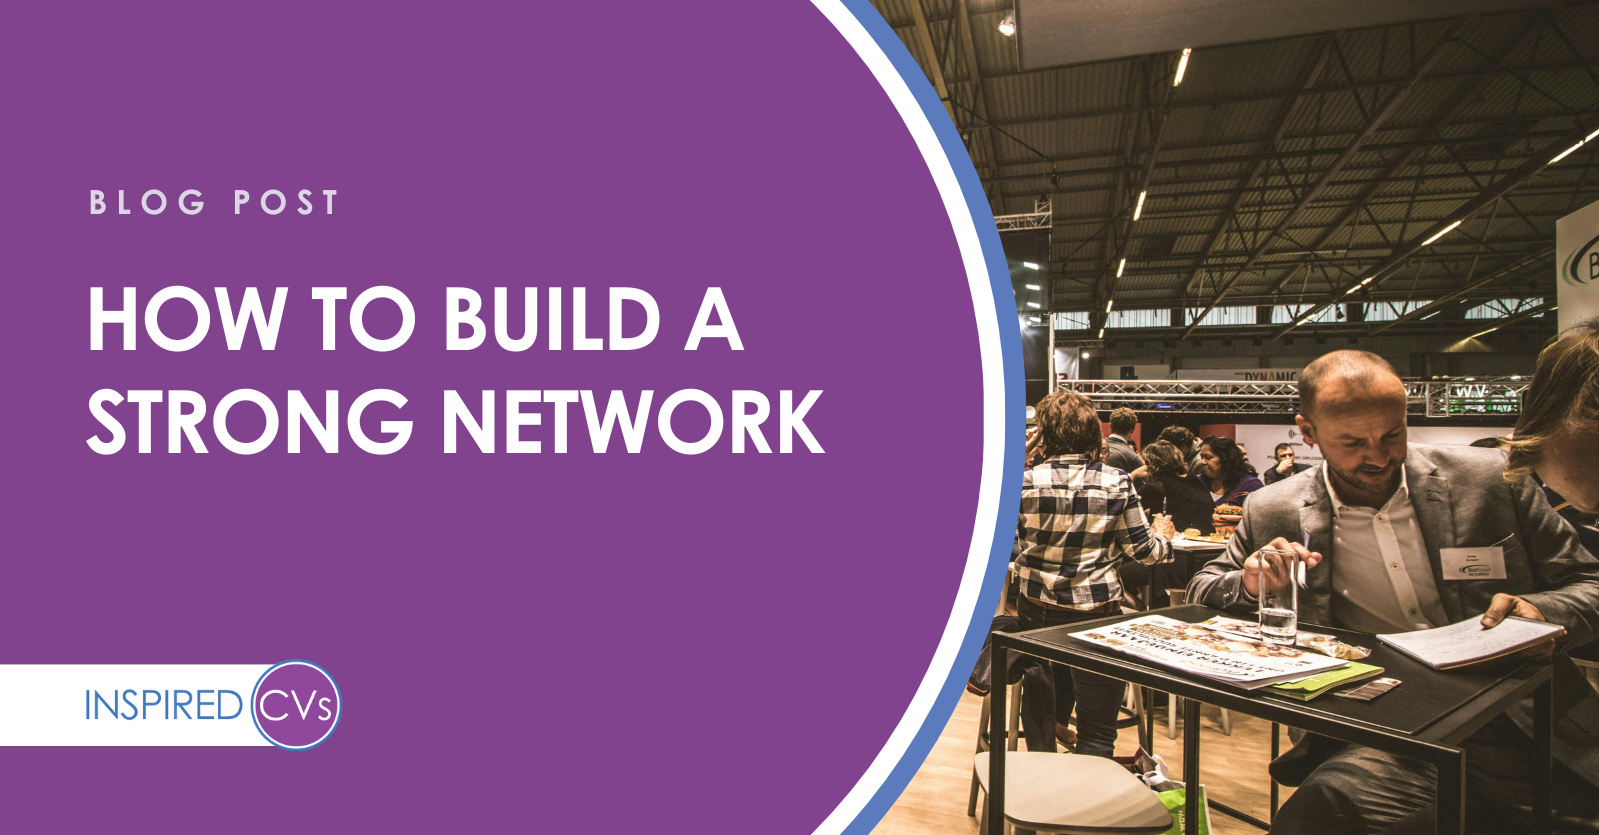 How to Build a Strong Network